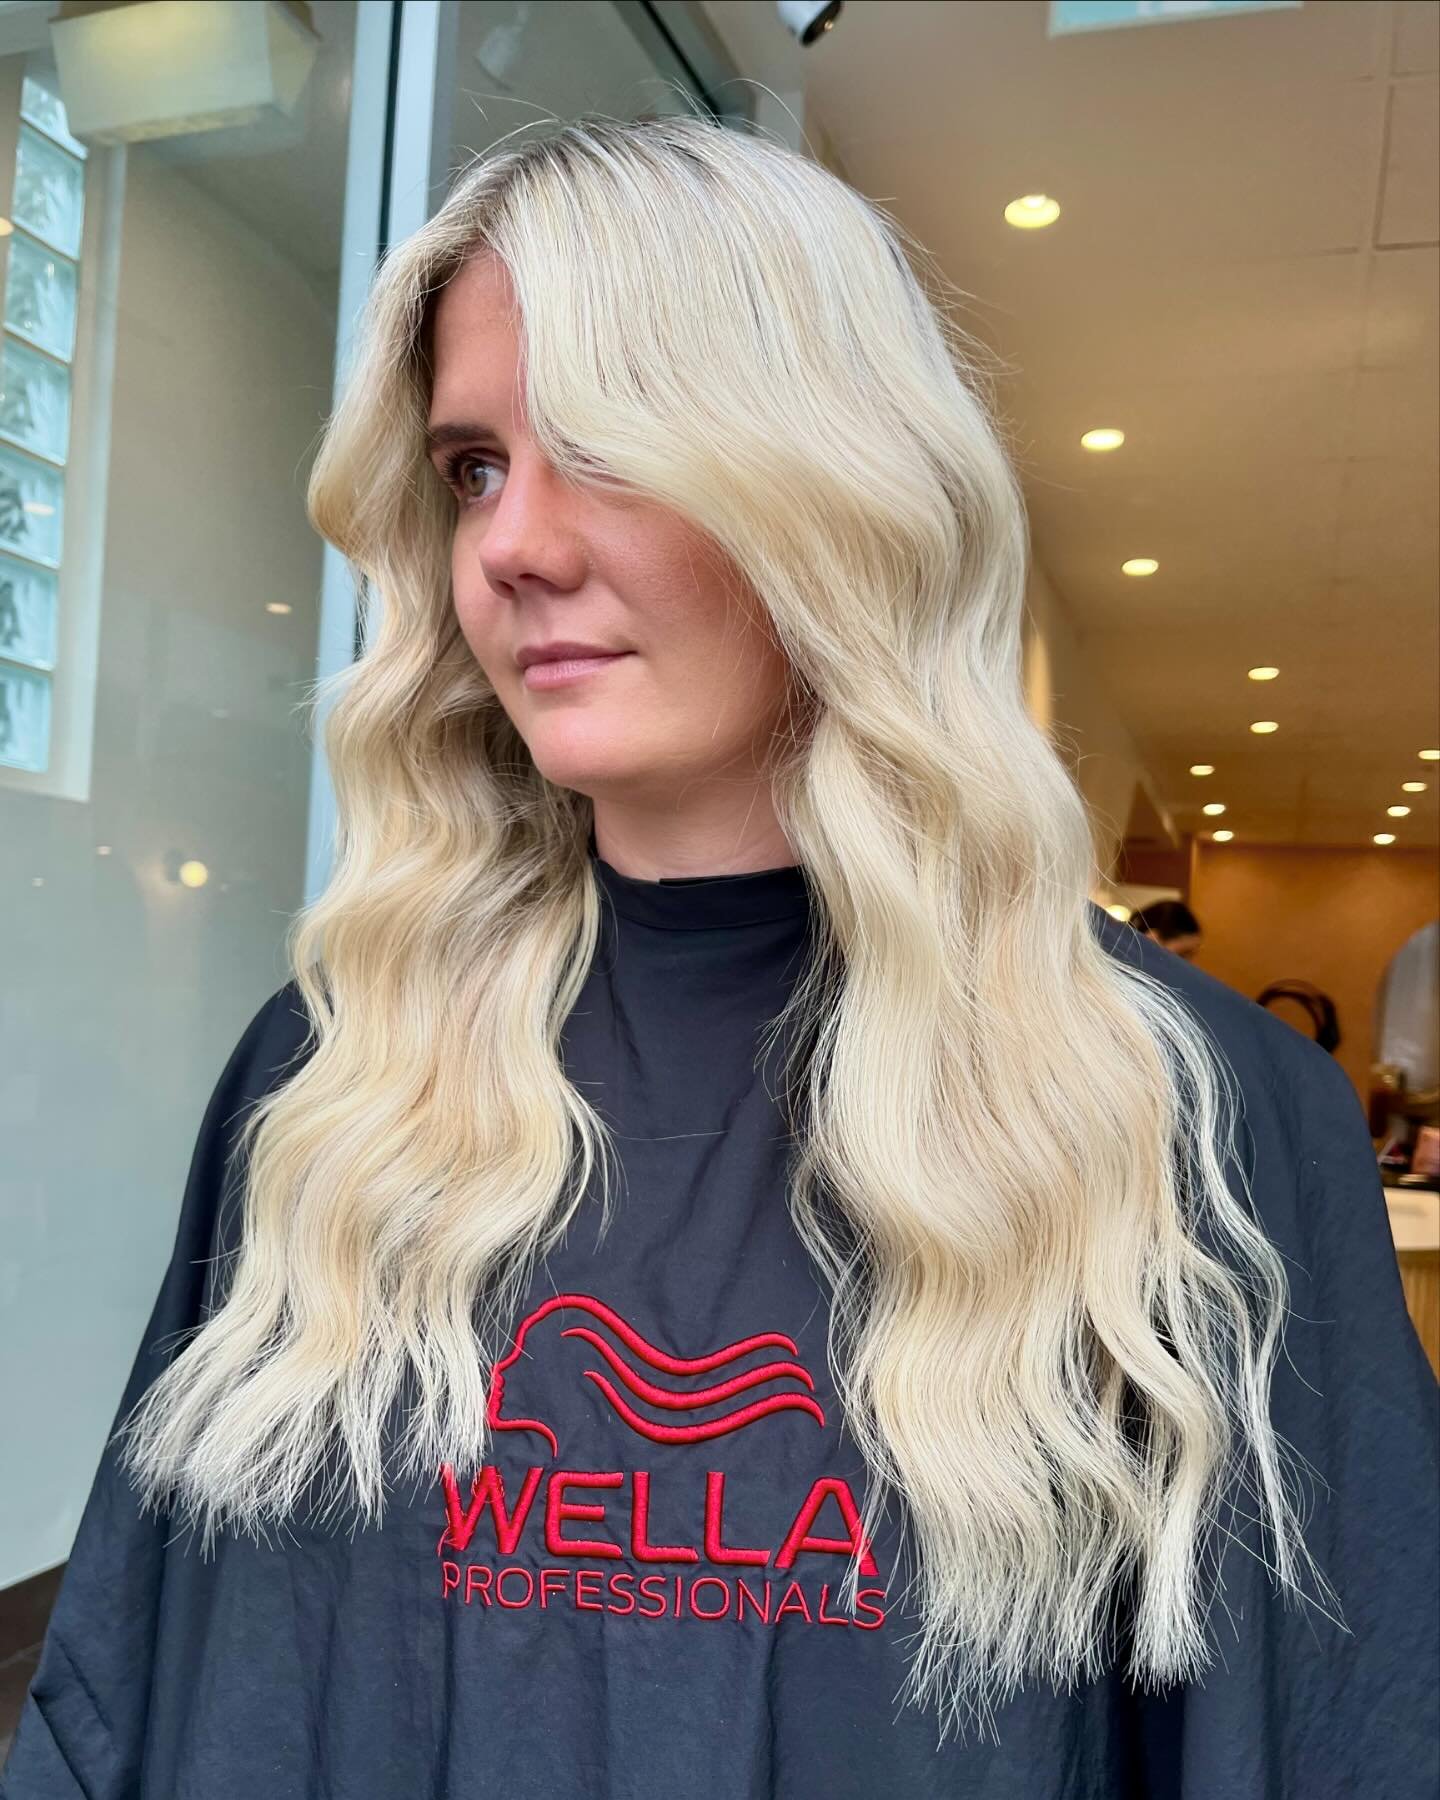 COLLAB ALERT 🚨 @beth_blondee teamed up with @hairbysophors to create this stunning extension transformation! 🤍 

Beautiful blonde as always by our salon mama @hairbysophors 🔥 And extension application &amp; style by @beth_blondee ✨

Team work make